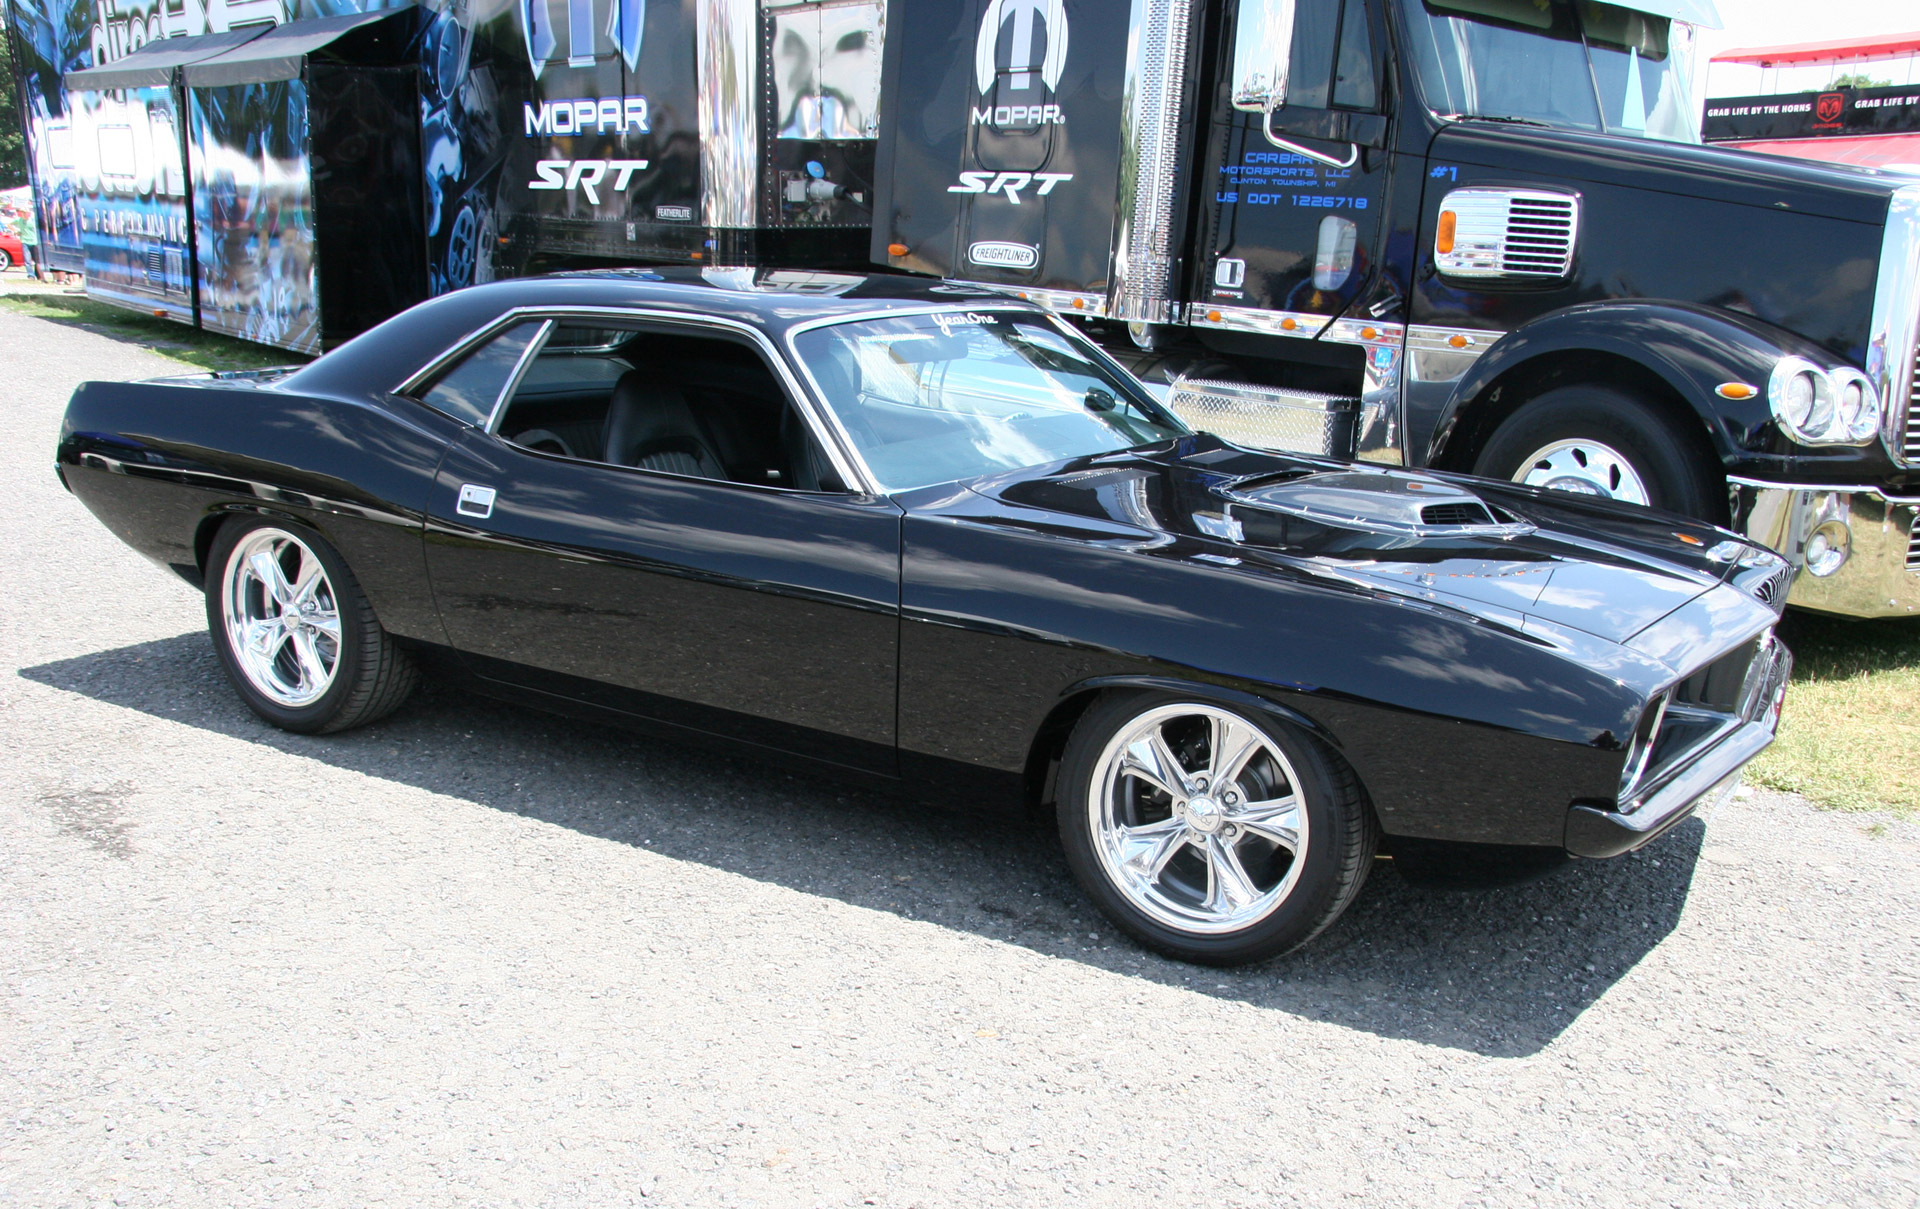 Barracuda coming back as a Dodge?